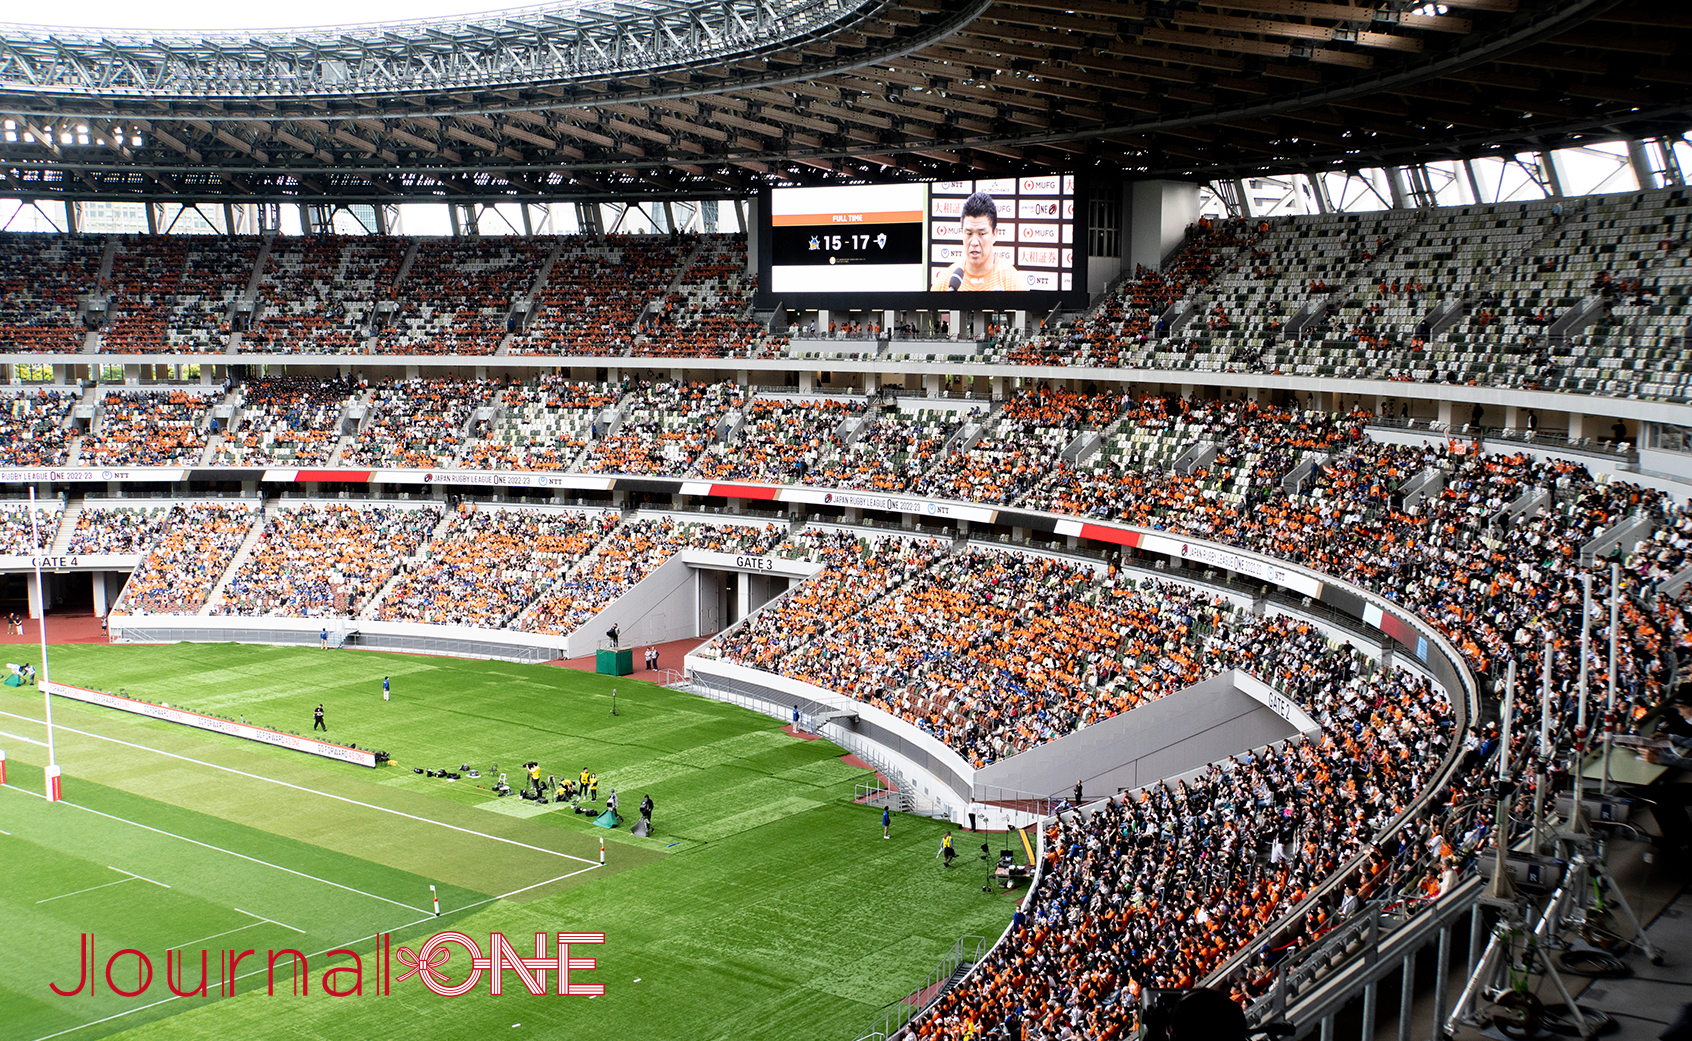 Japan Rugby League One final Match, The National Stadium in Tokyo, Japan; Photo by Journal-ONE